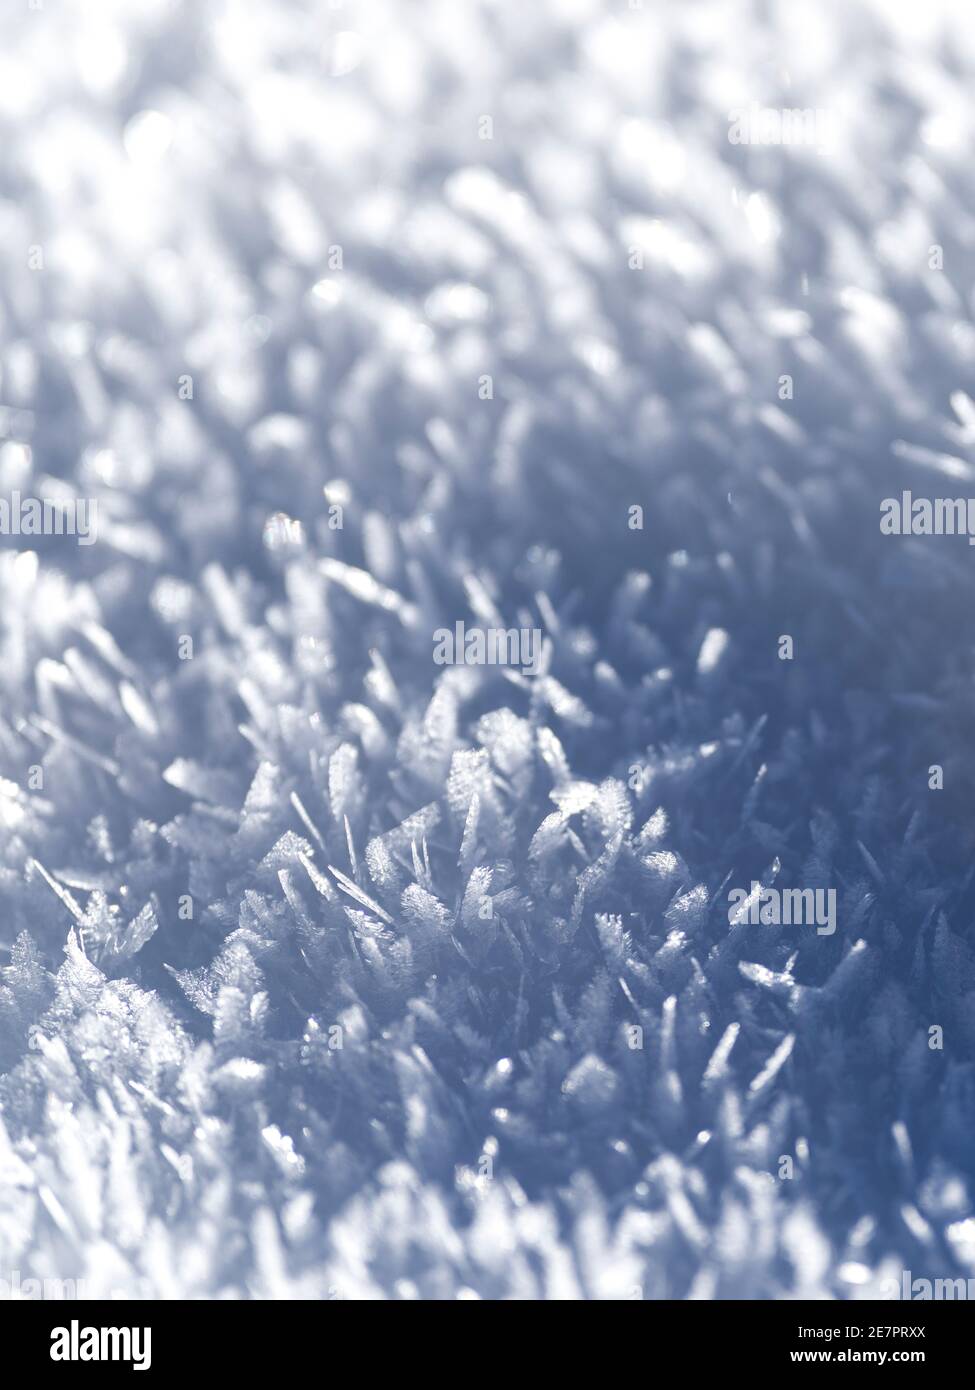 Abstract white and blue background of frozen snowflakes Stock Photo